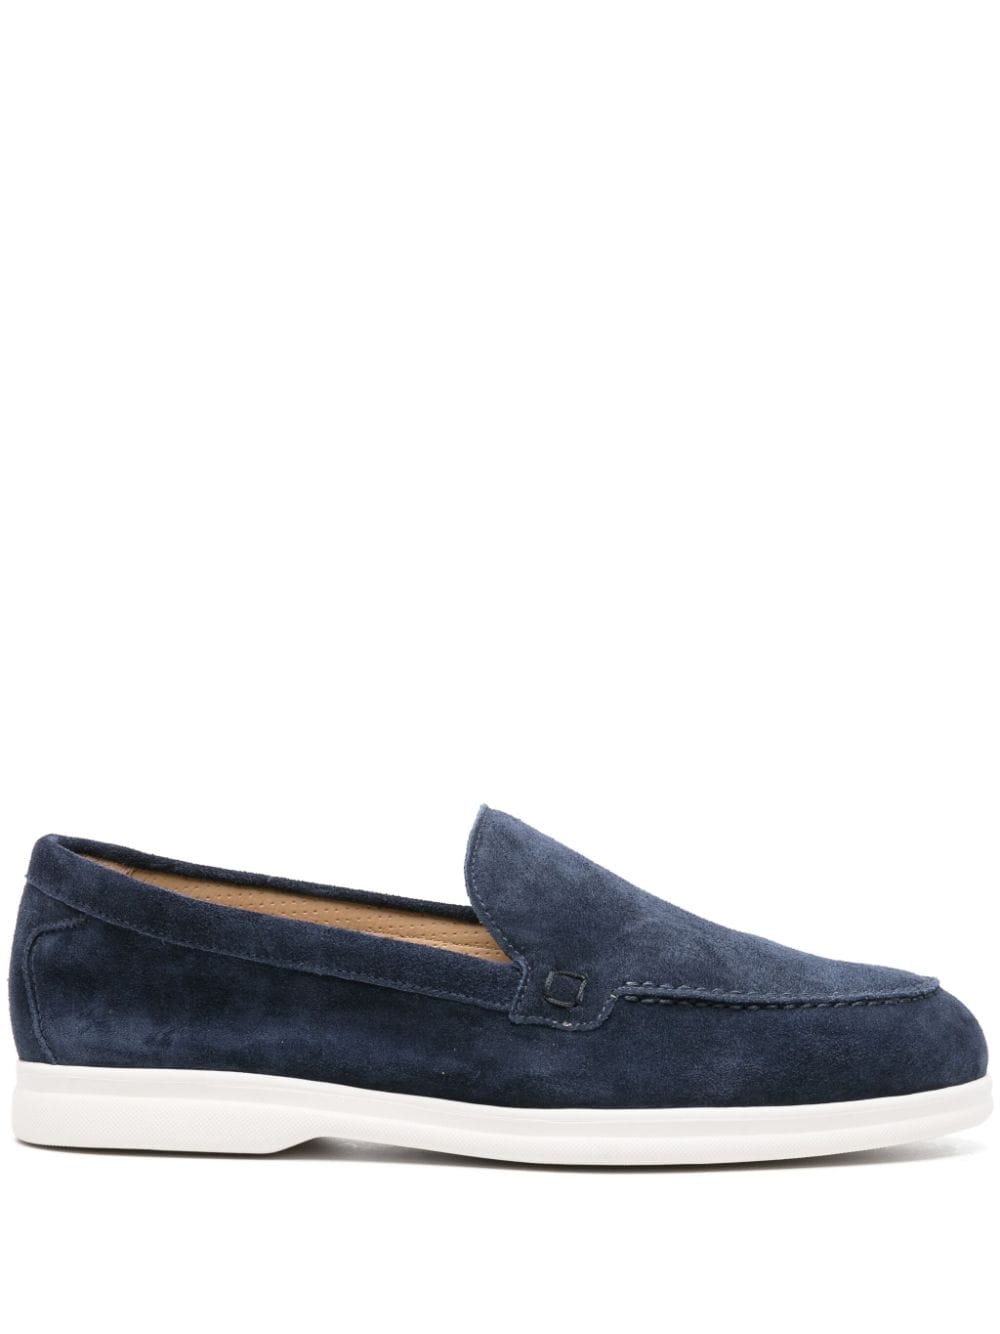 Doucal's almond-toe suede loafers - Blue von Doucal's